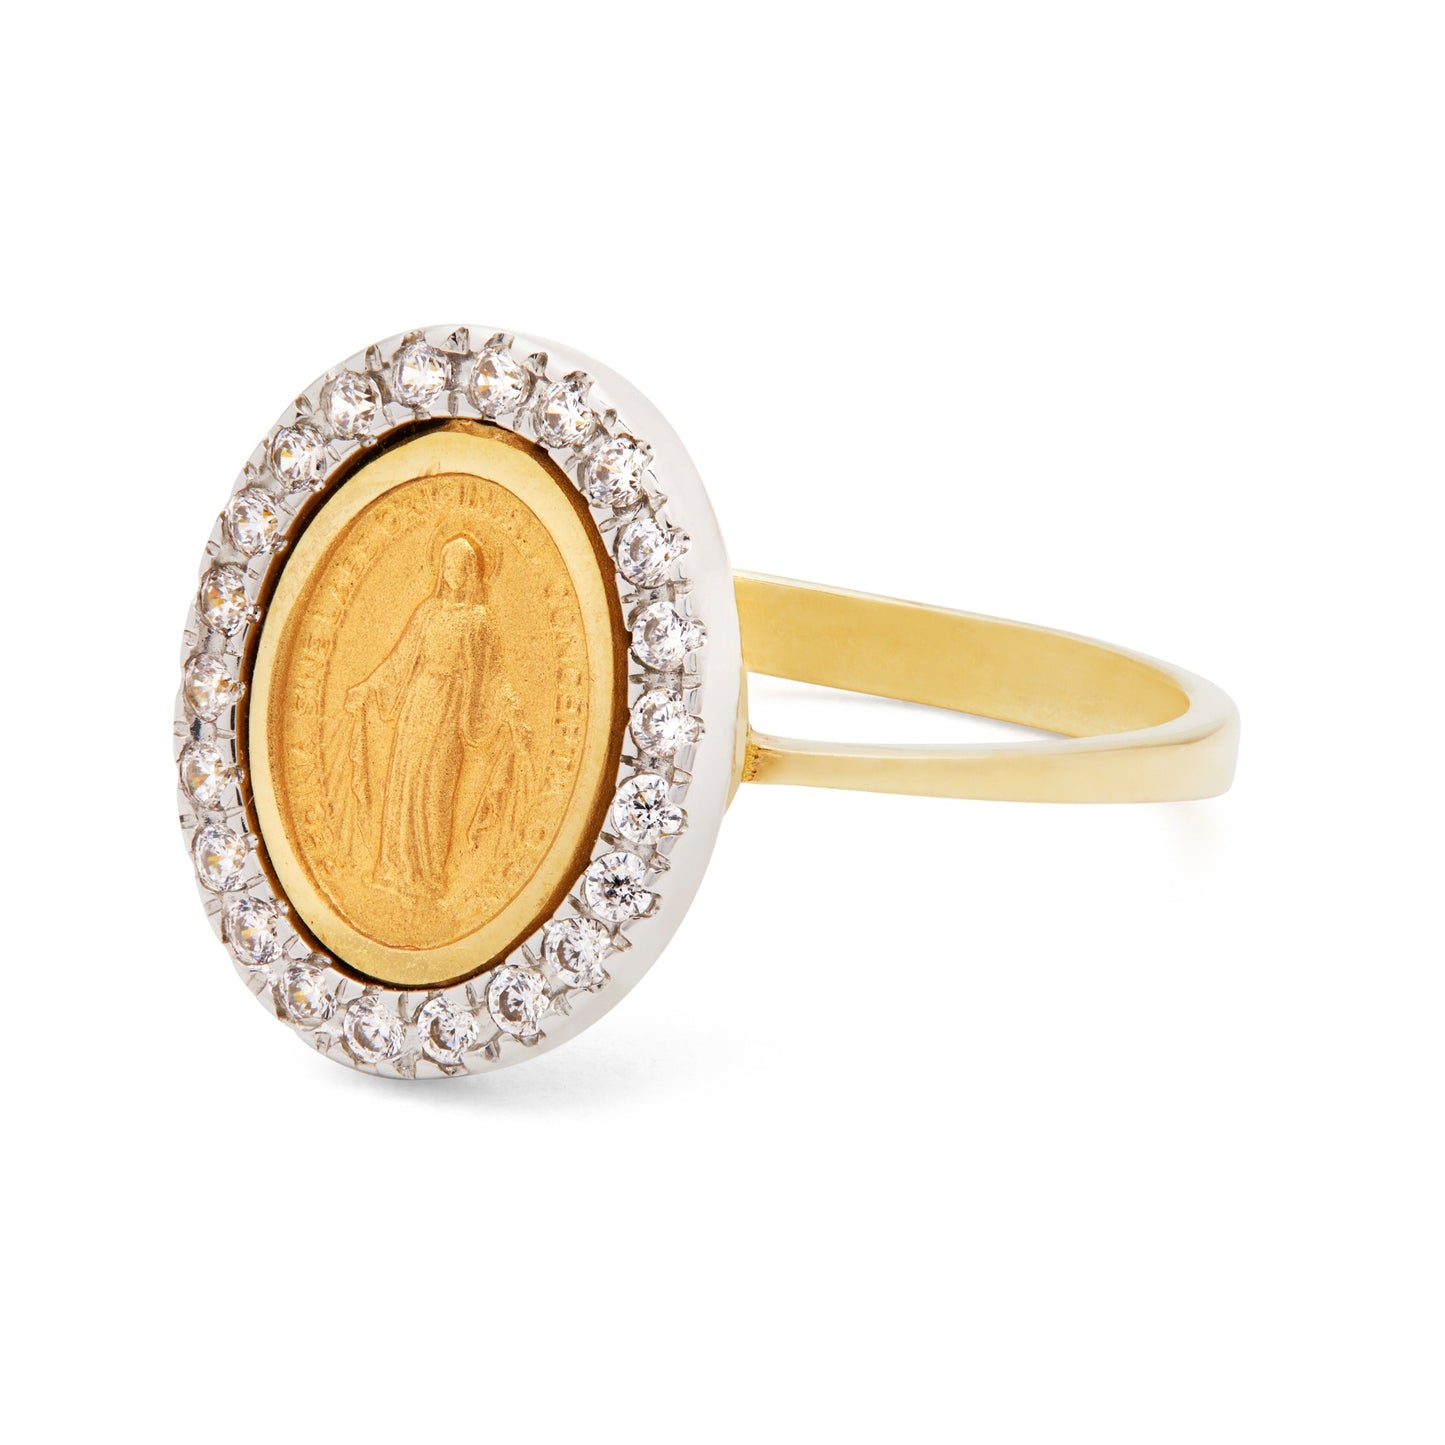 Mondo Cattolico Gold Ring With Miraculous Medal With White Gold and Cubic Zirconia Details